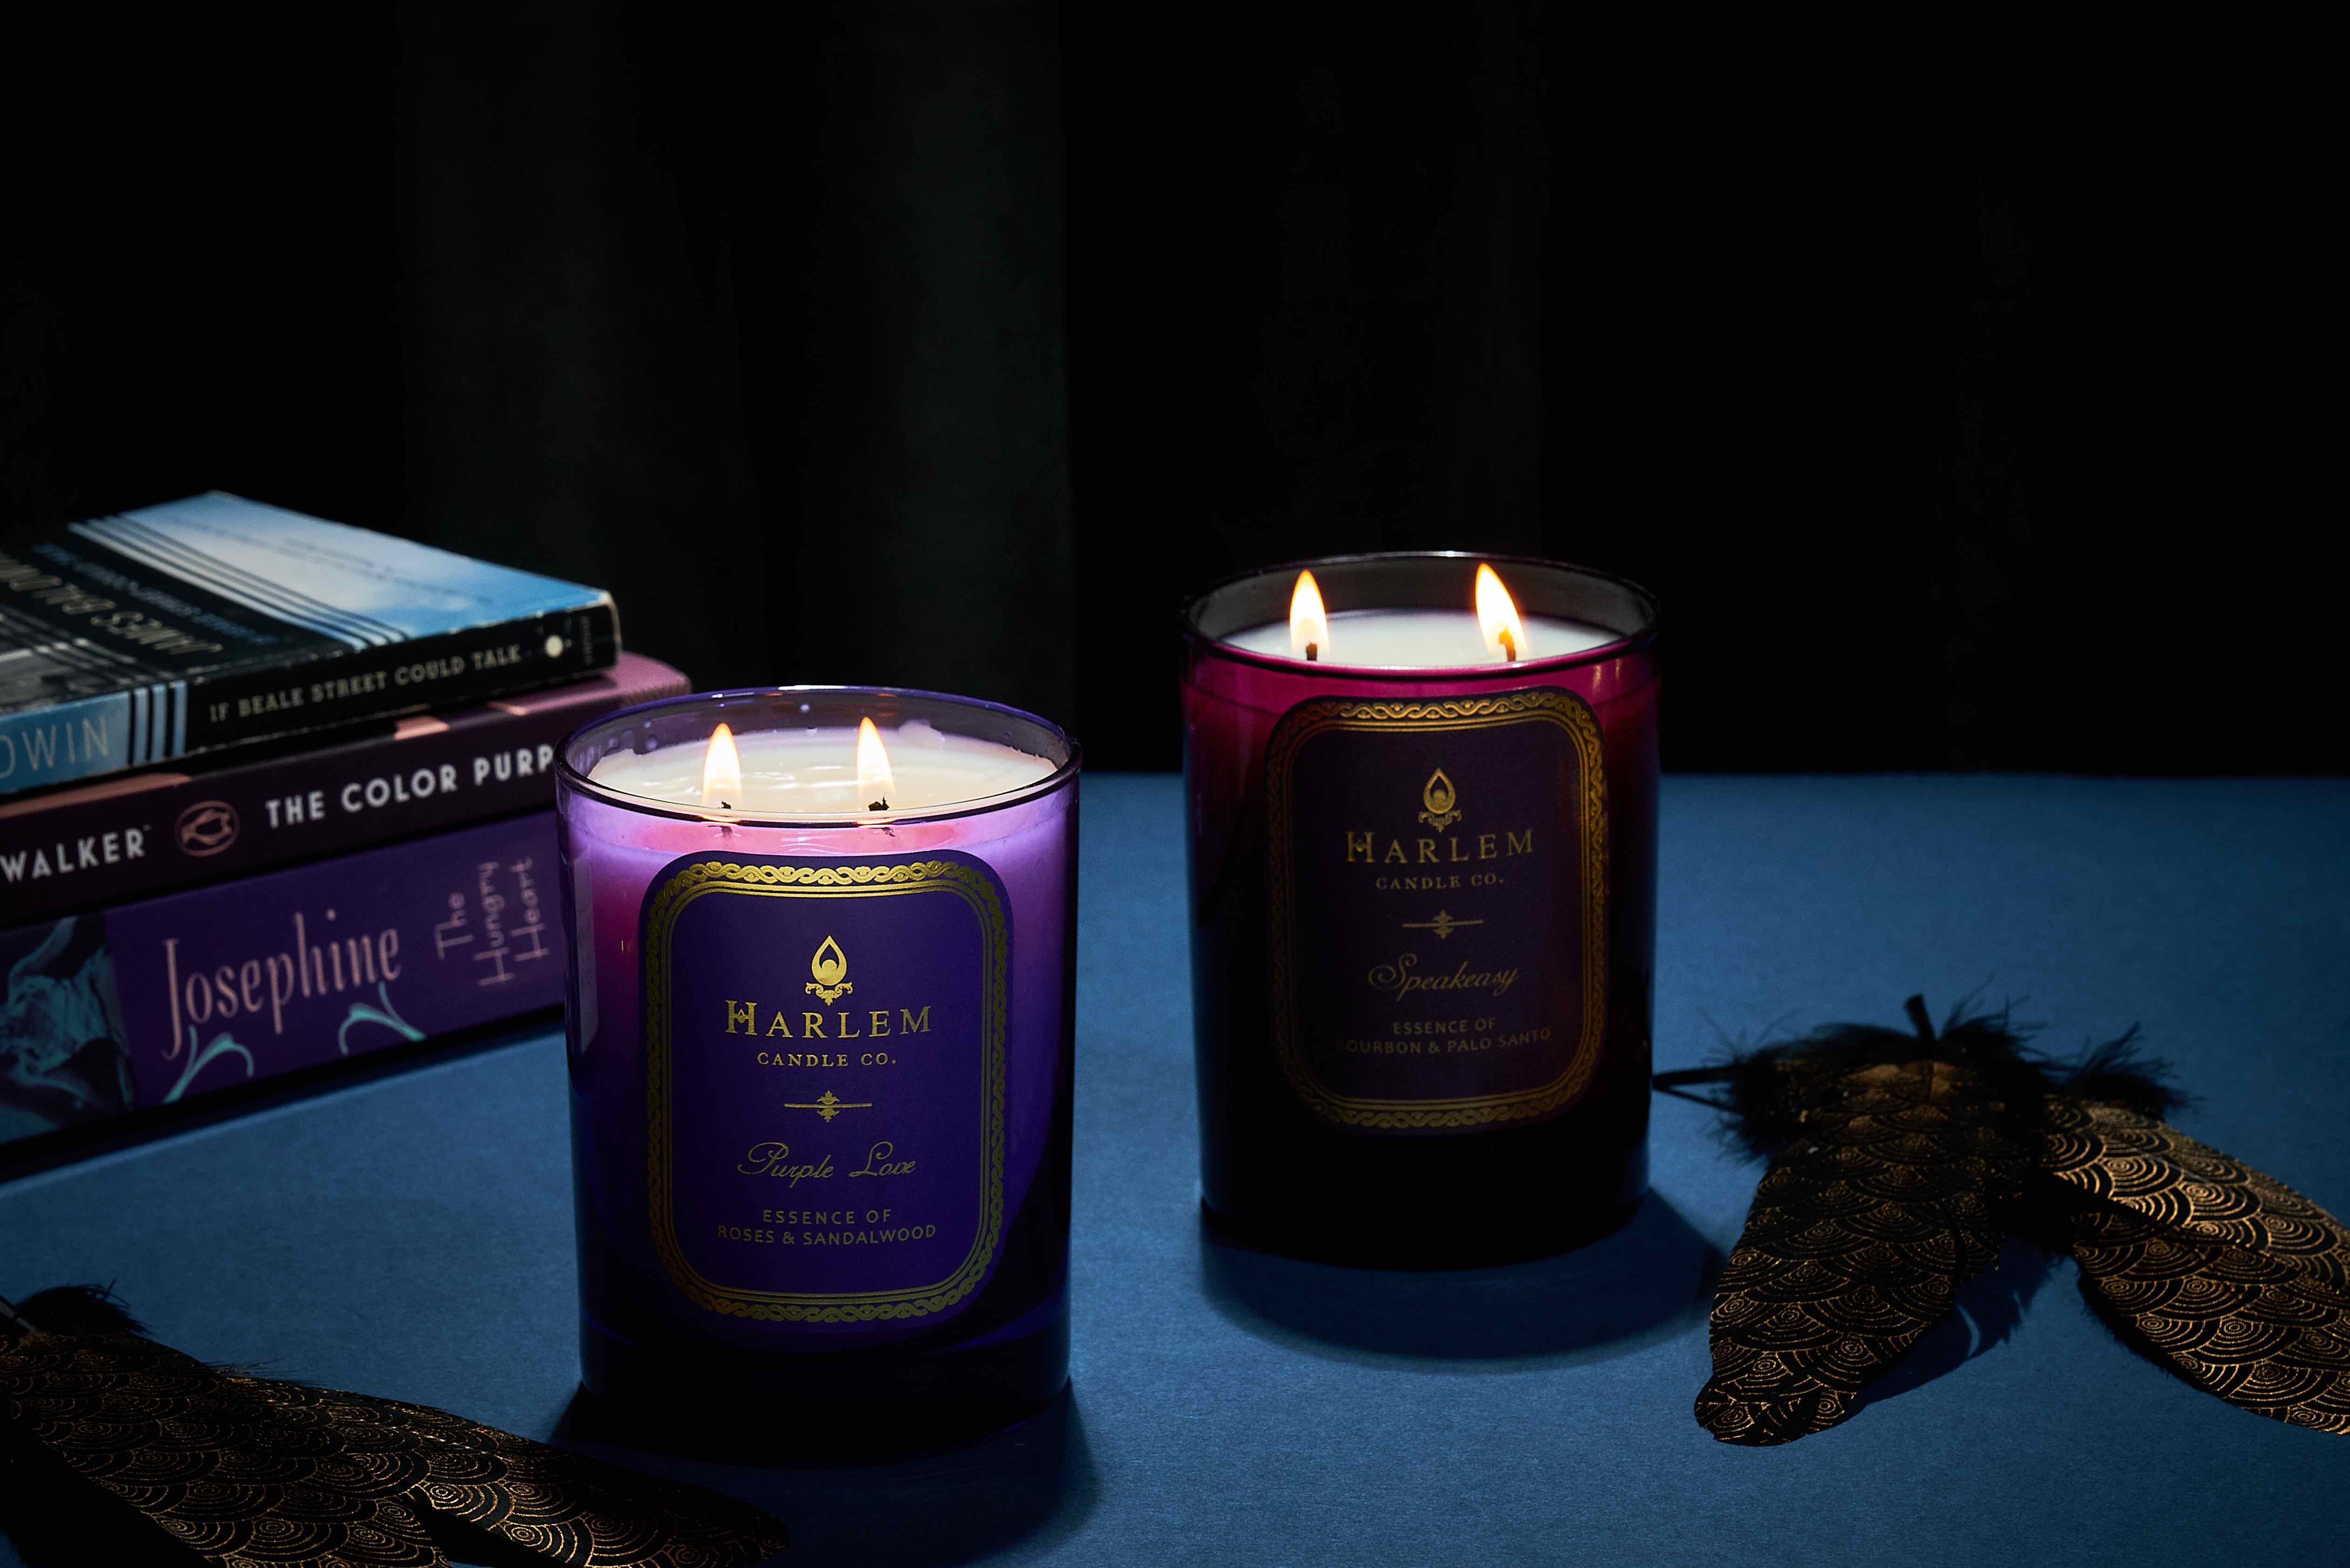 This is an image of our Speakeasy and Purple Love candle bundle on a blue table with books behind.